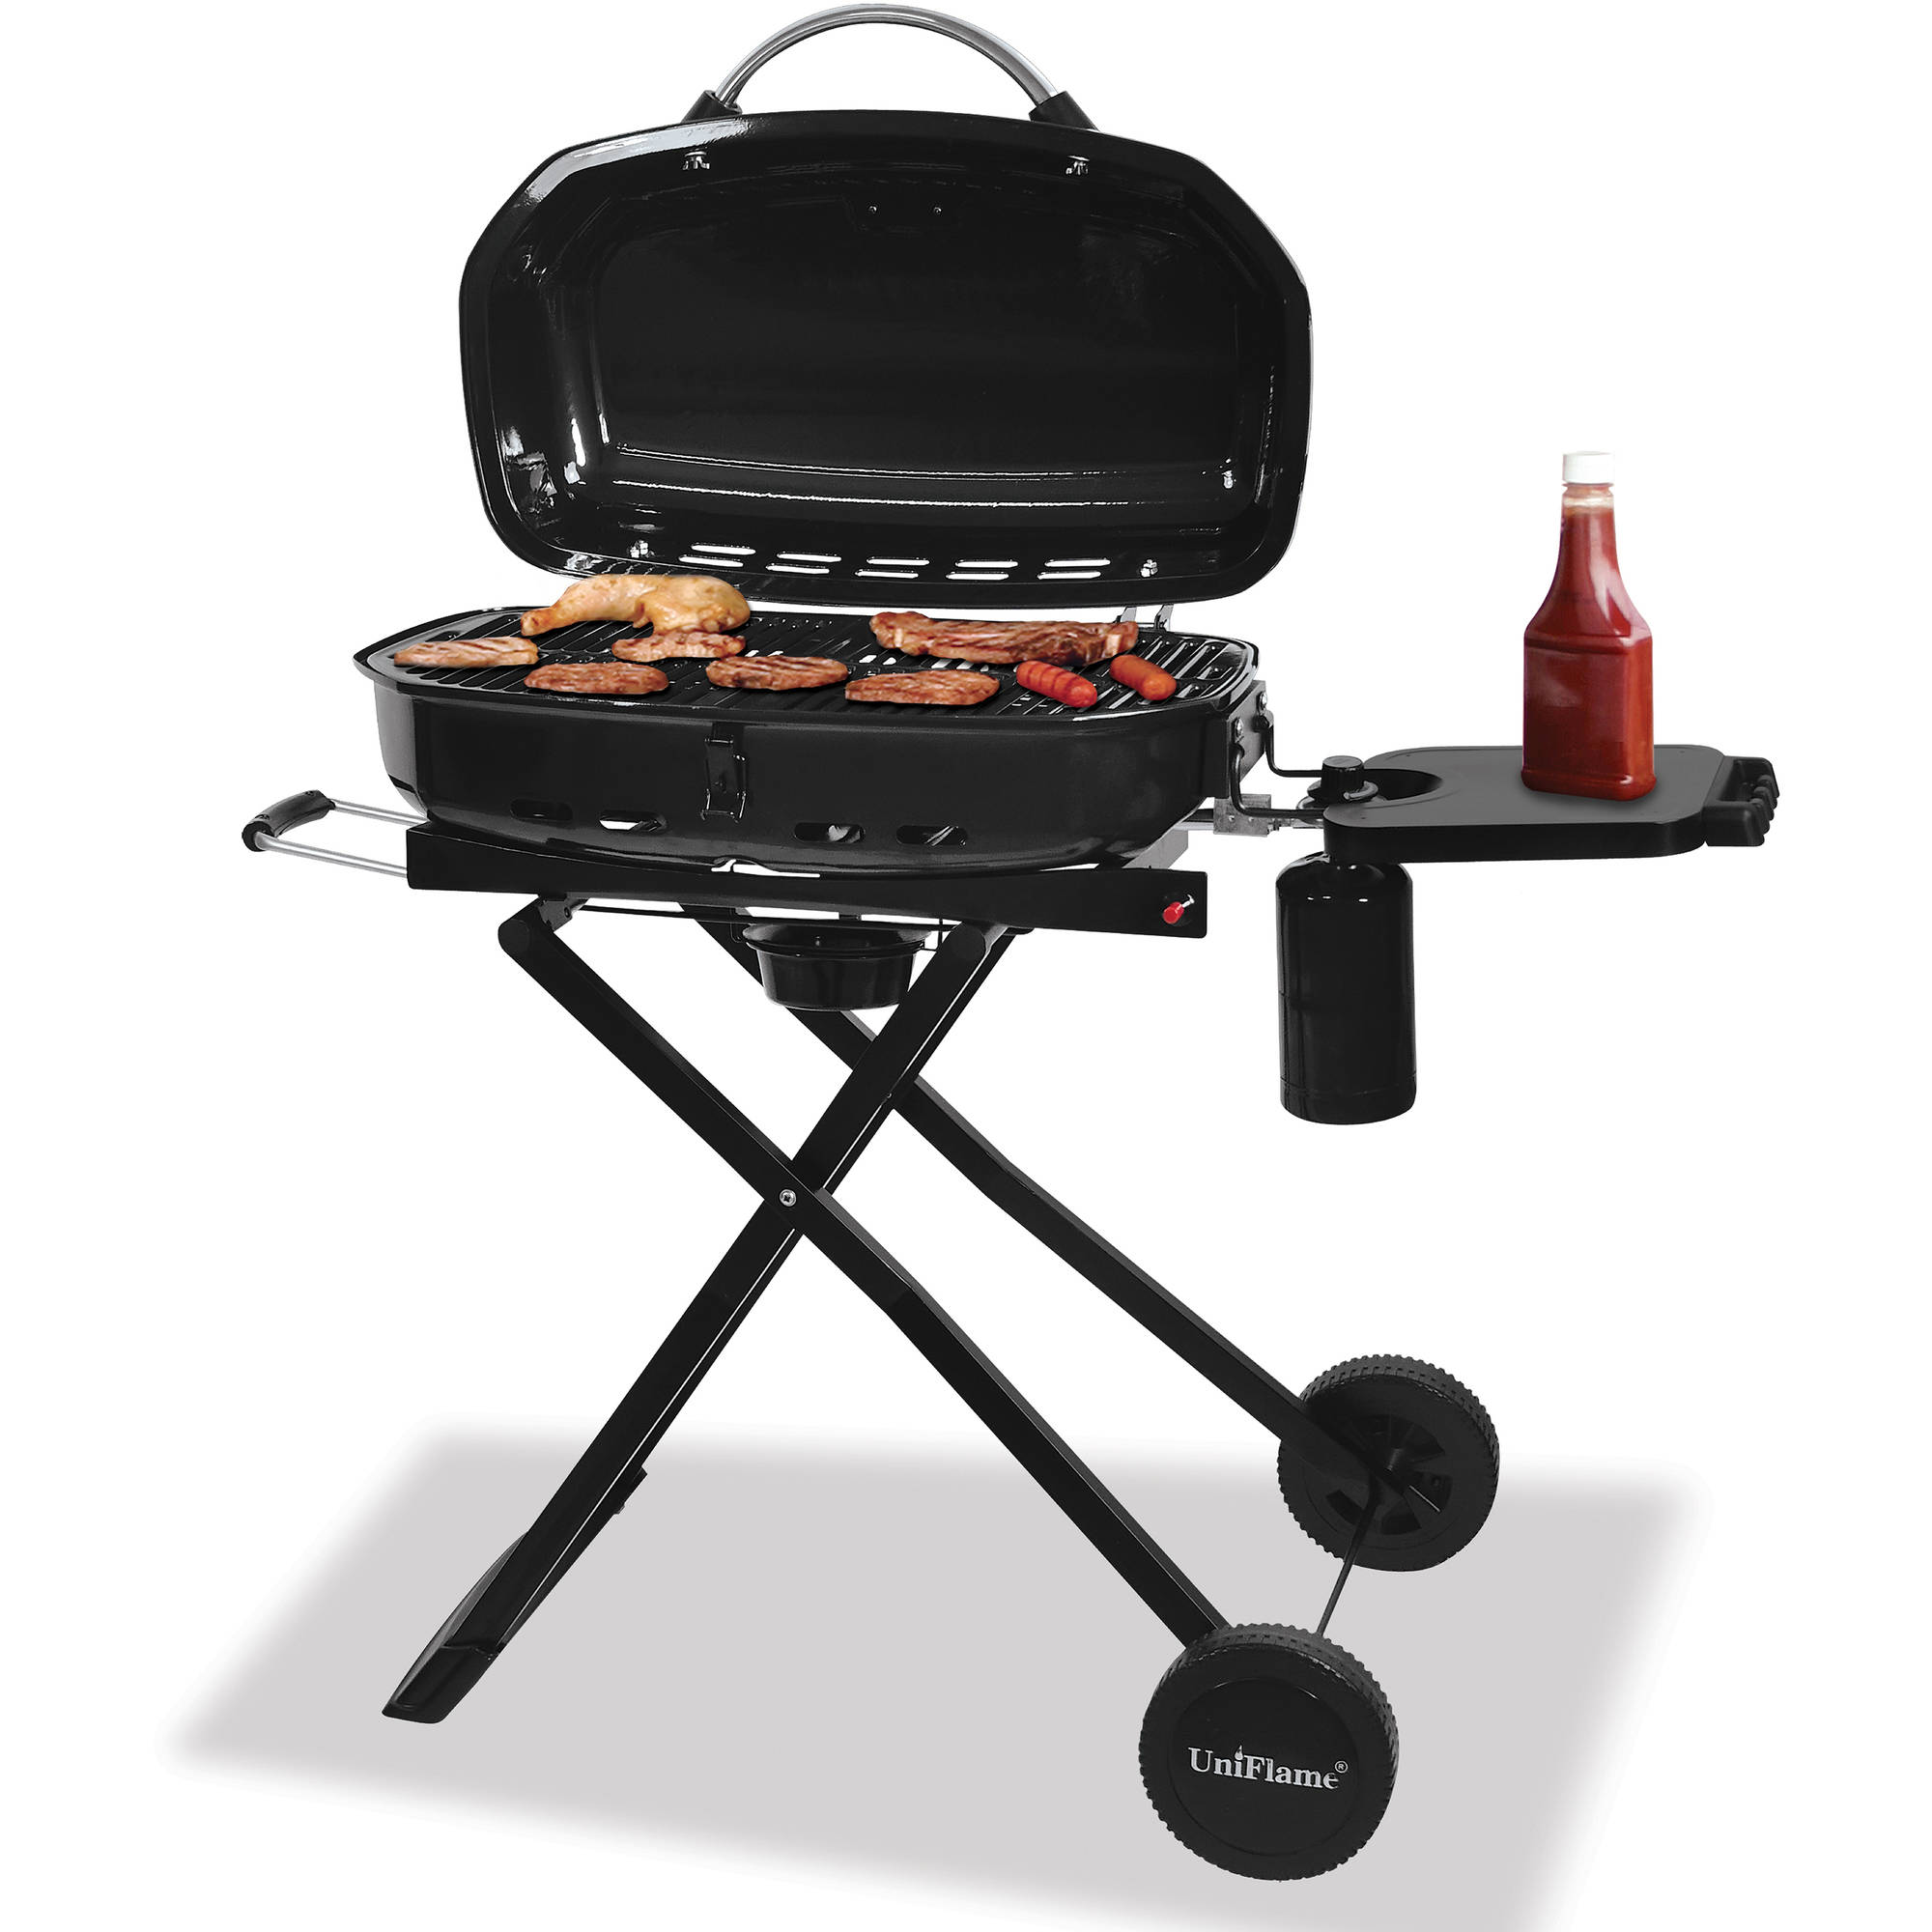 Uniflame Portable Gas Grill - image 2 of 2